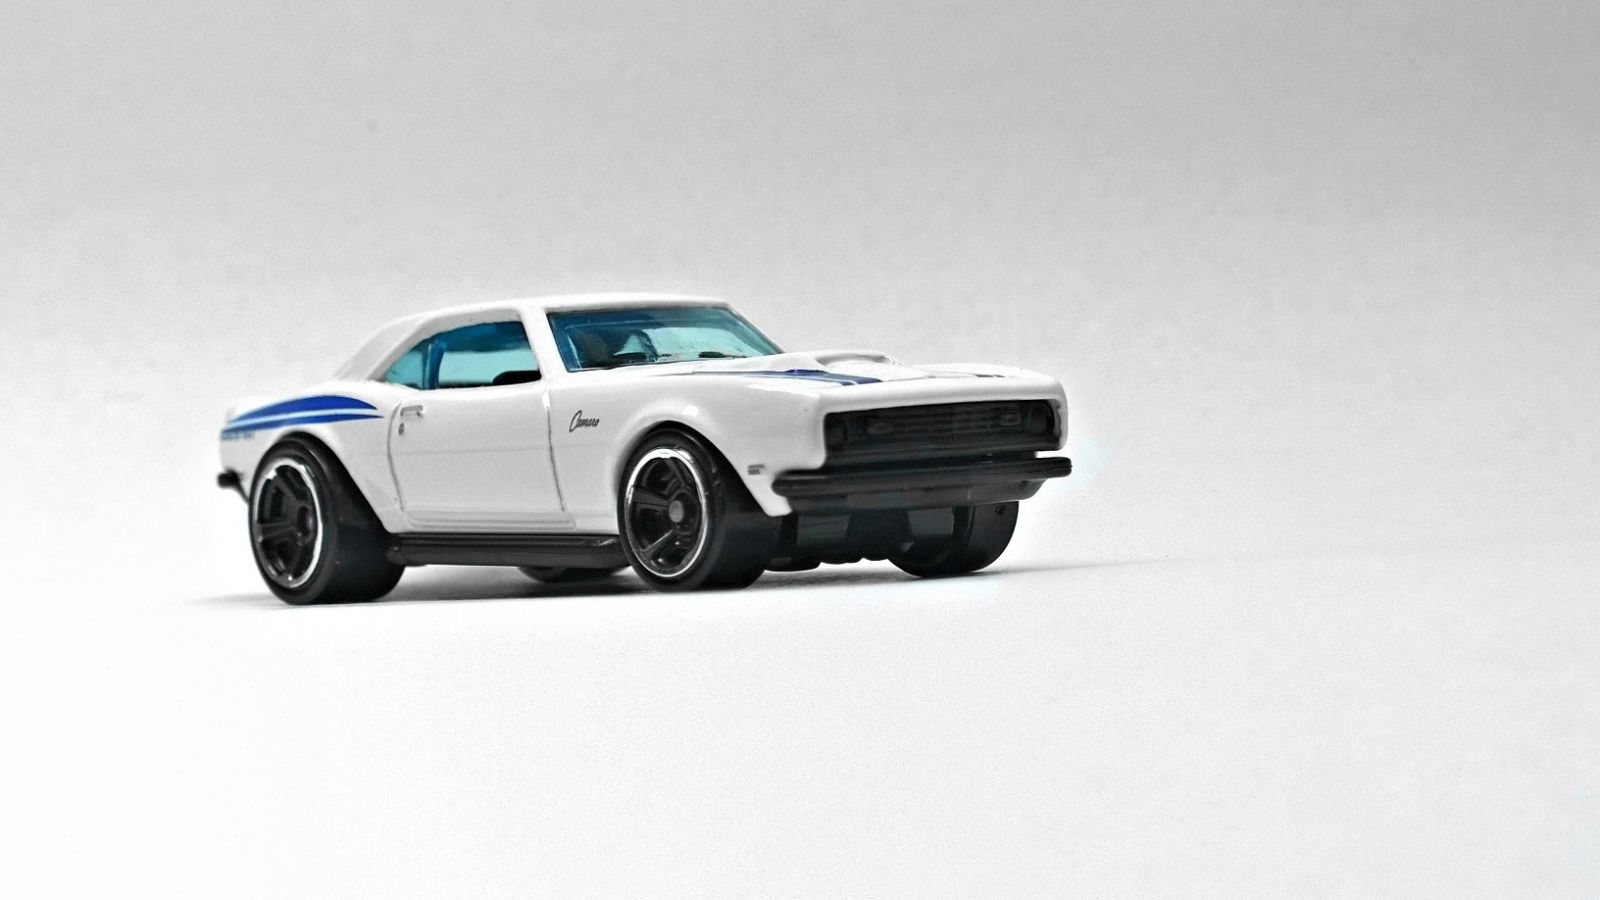 Illustration for article titled 1968 COPO Camaro pics. Recent N case HAWL